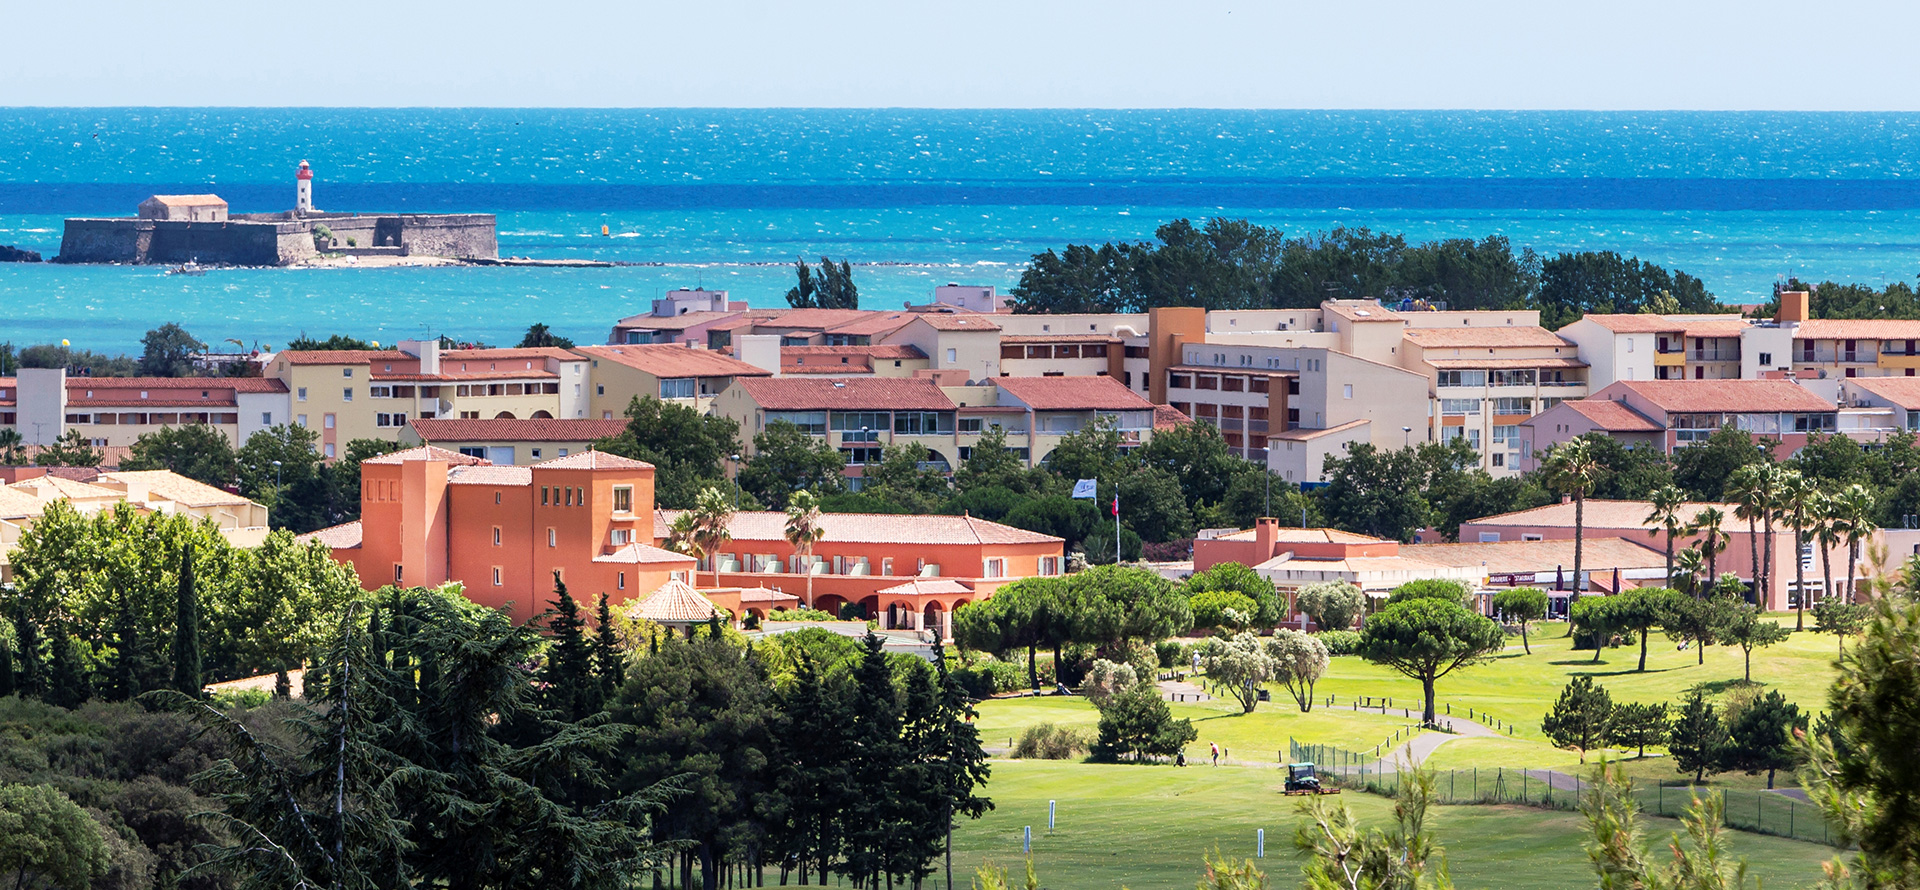 Overall view of the 4-star Palmyra Golf hotel beside the Cap d’Agde International Golf course